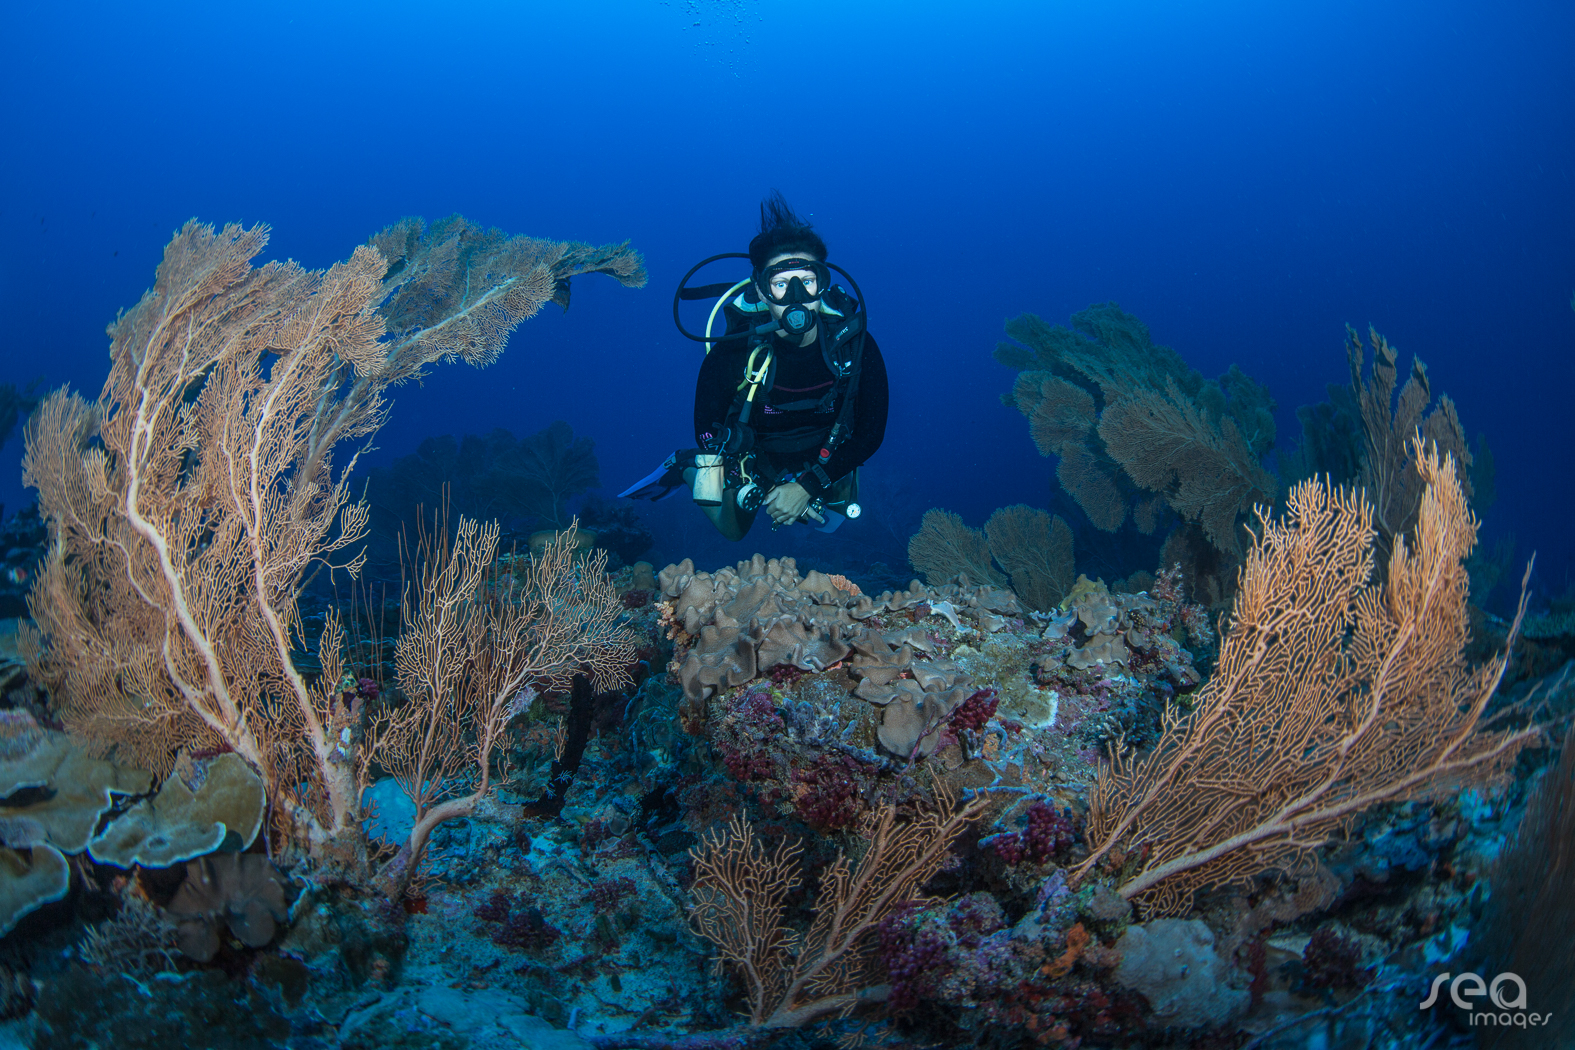 Diving and scuba diving activities at the resort